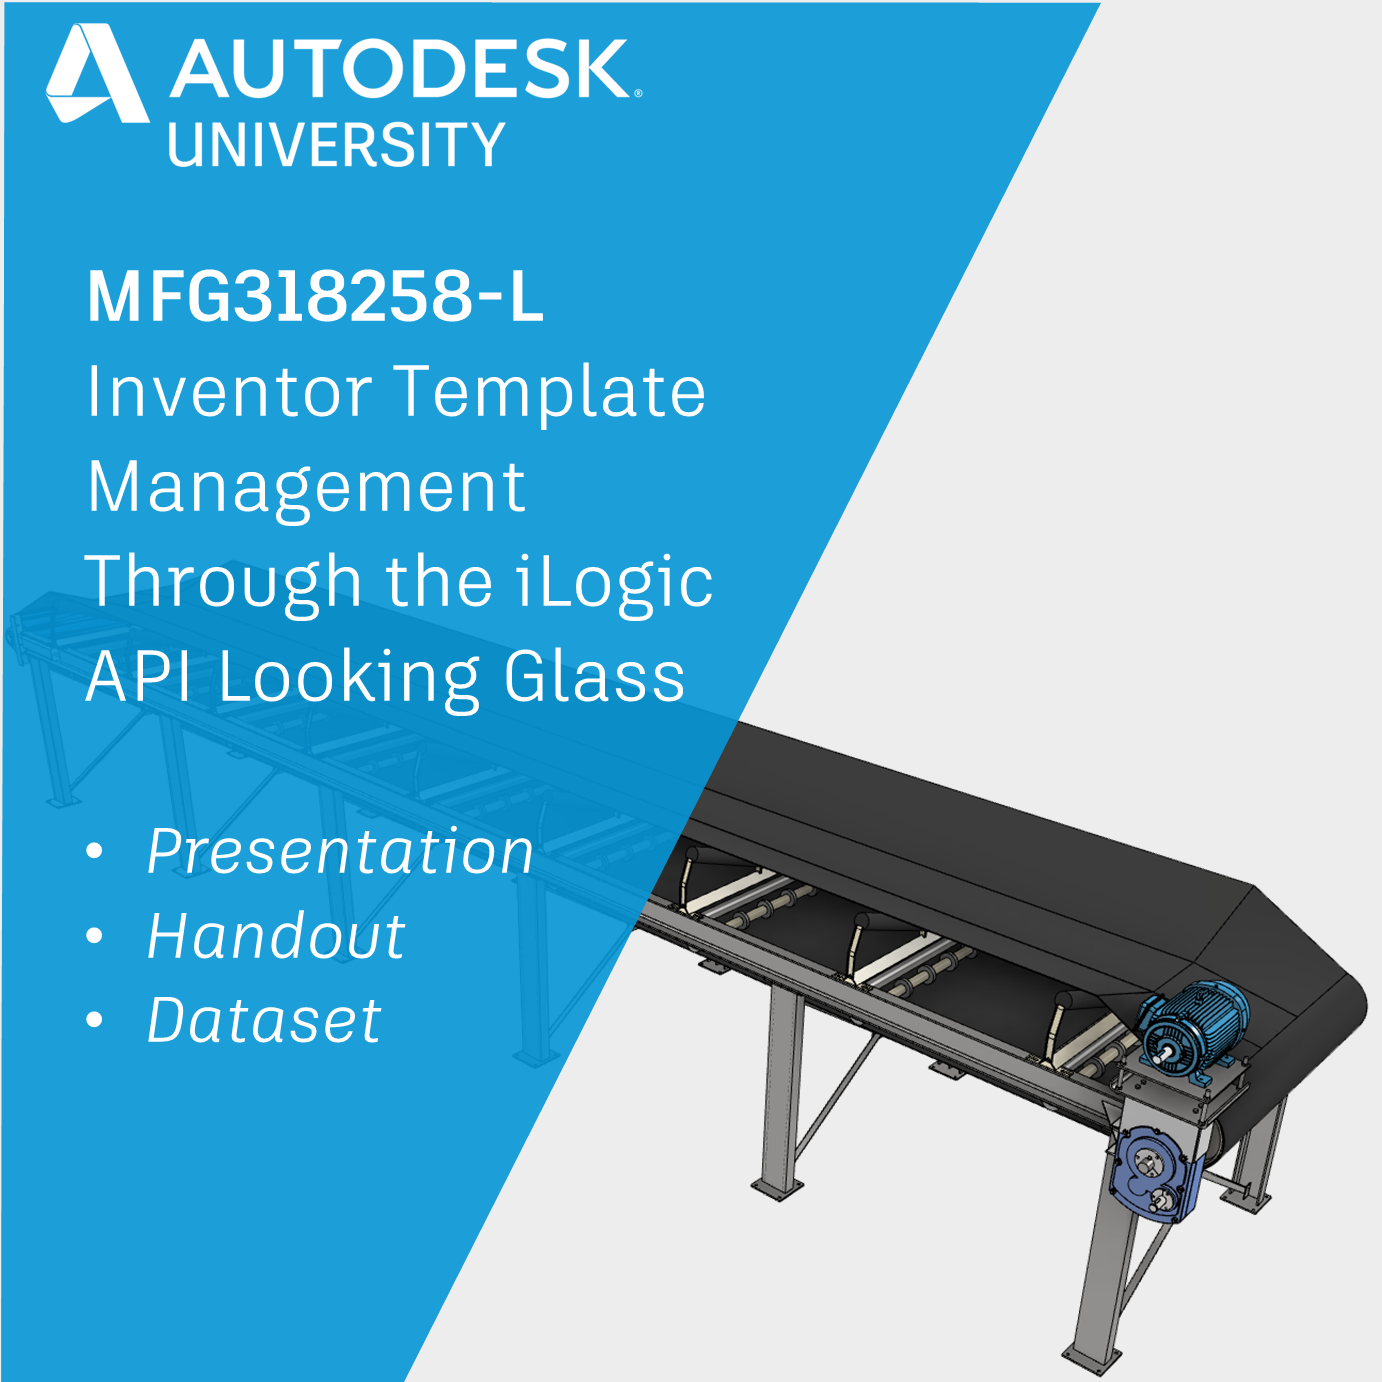 MFG318258-L Inventor Template Management Through the iLogic API Looking Glass